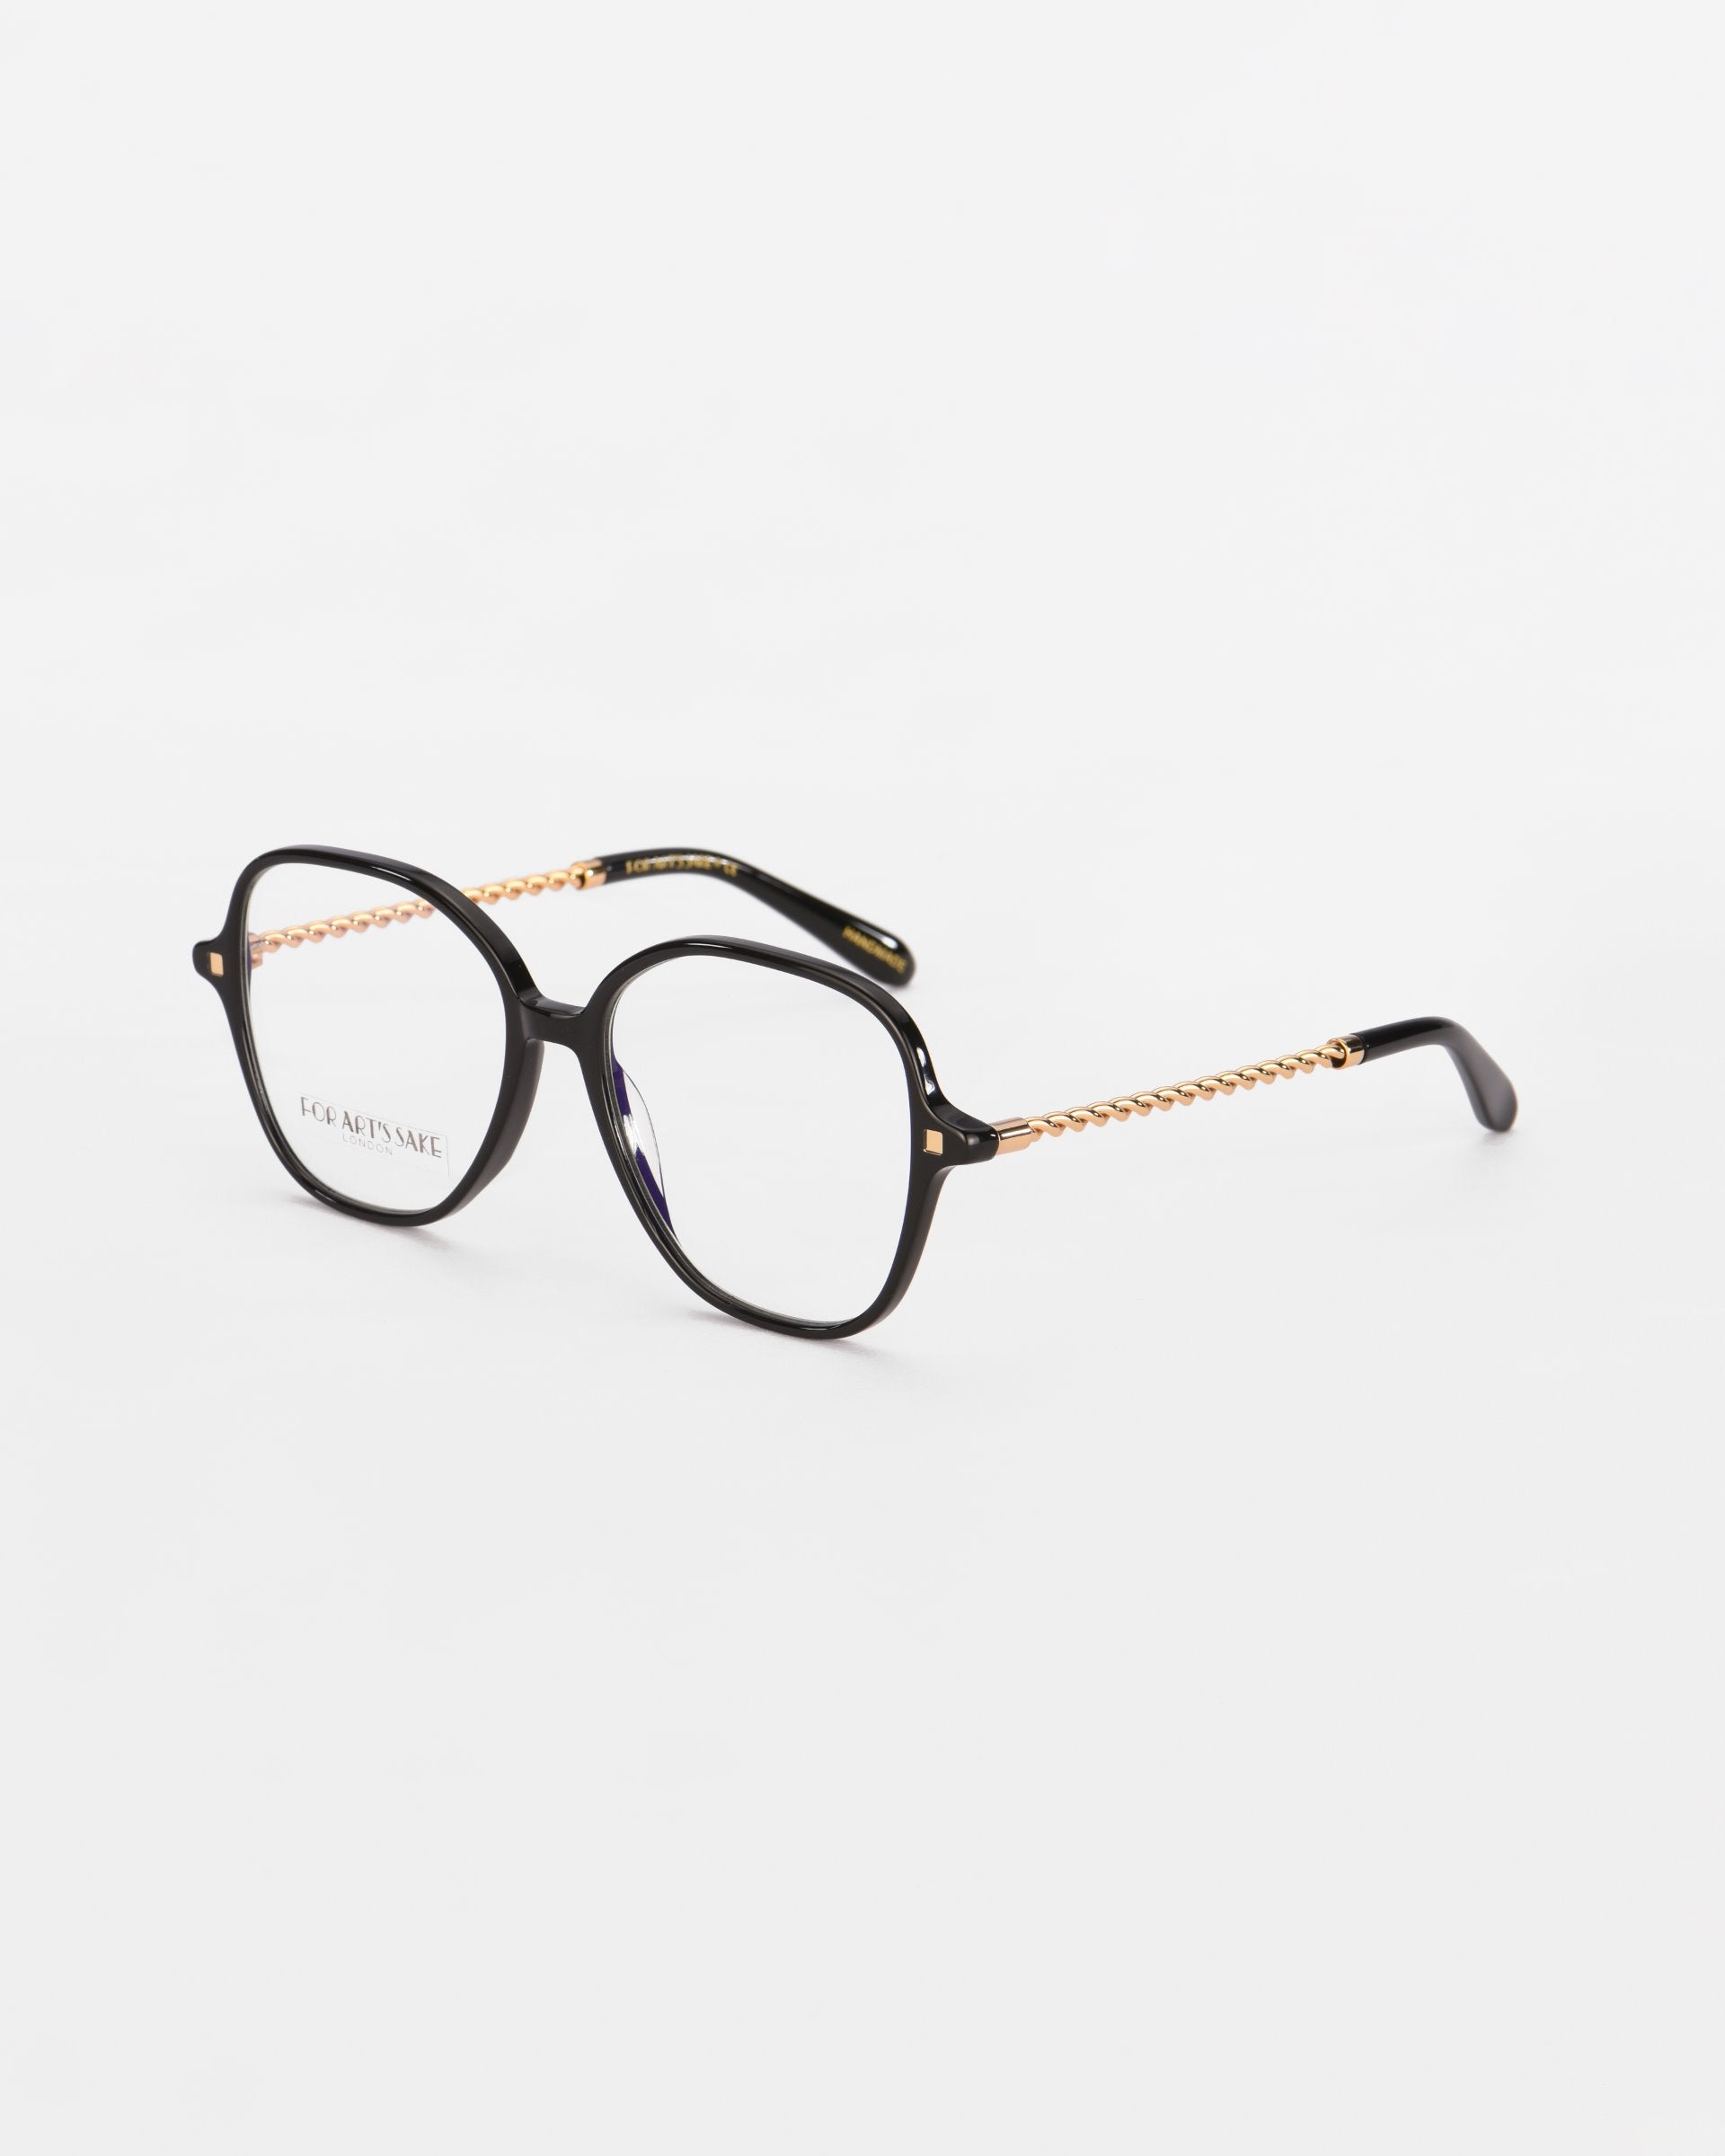 A pair of black Dumpling eyeglasses with a square frame and gold arms by For Art's Sake®. The arms have a decorative chain-like pattern. The lenses offer blue light filter protection. The glasses are placed on a white surface.